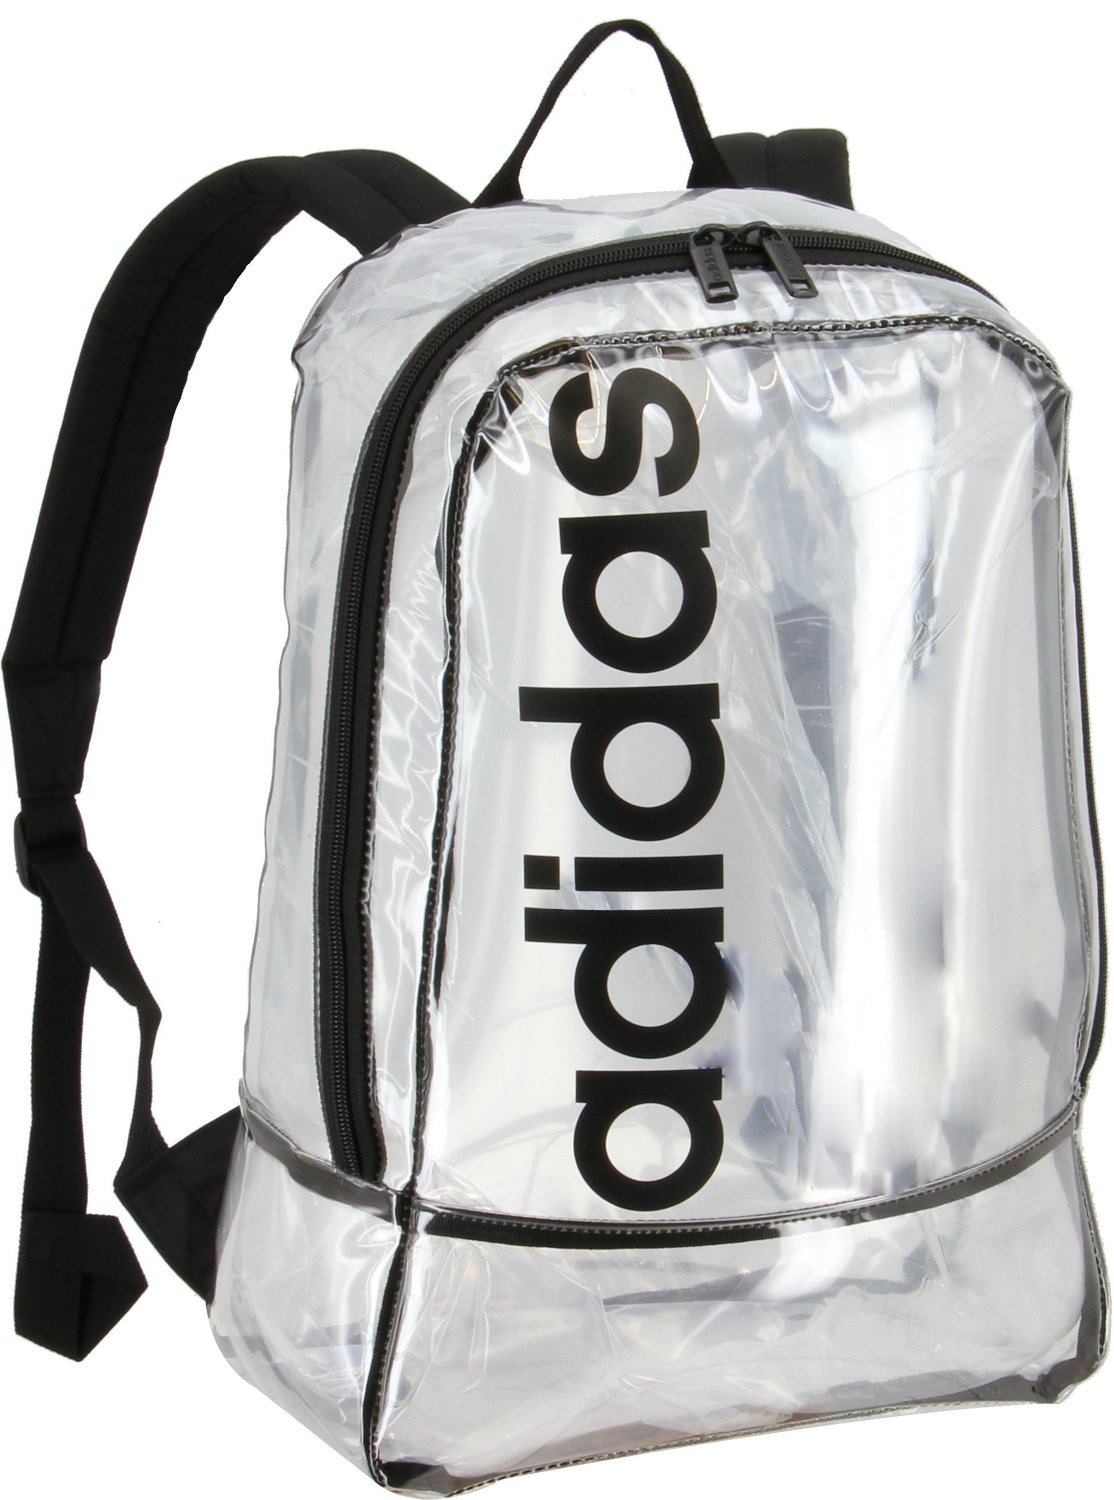 Adidas Clear Linear Backpack | Free Shipping at